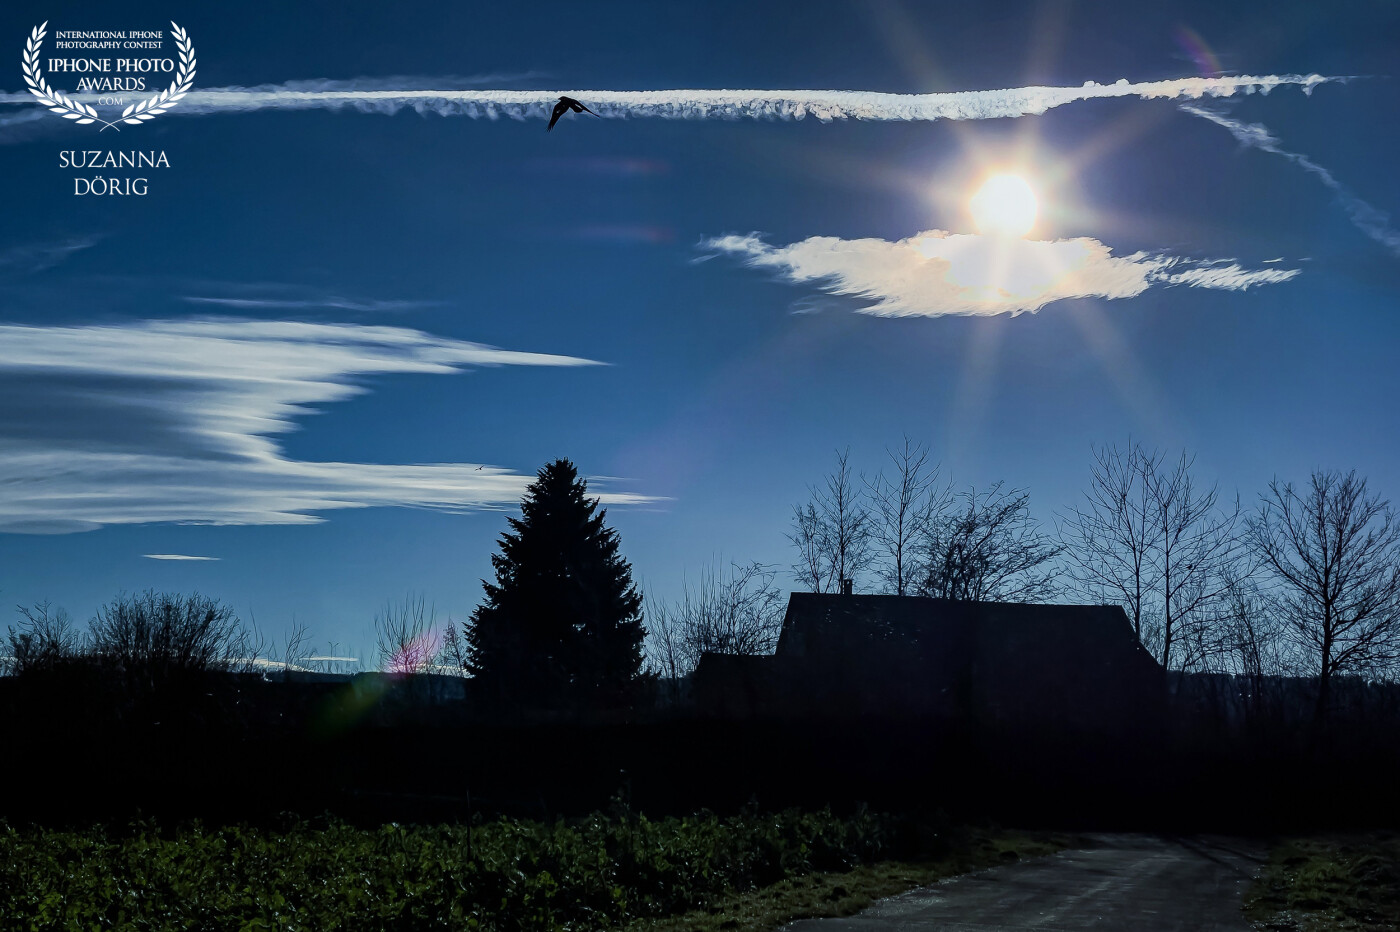 Let’s go outside.<br />
<br />
In Switzerland 🇨🇭 sometime there is a warm wind and the clouds look like the one on the left side. What I thought it was special in the scene is the bird crossing the path of the airplanes far above in the sky.